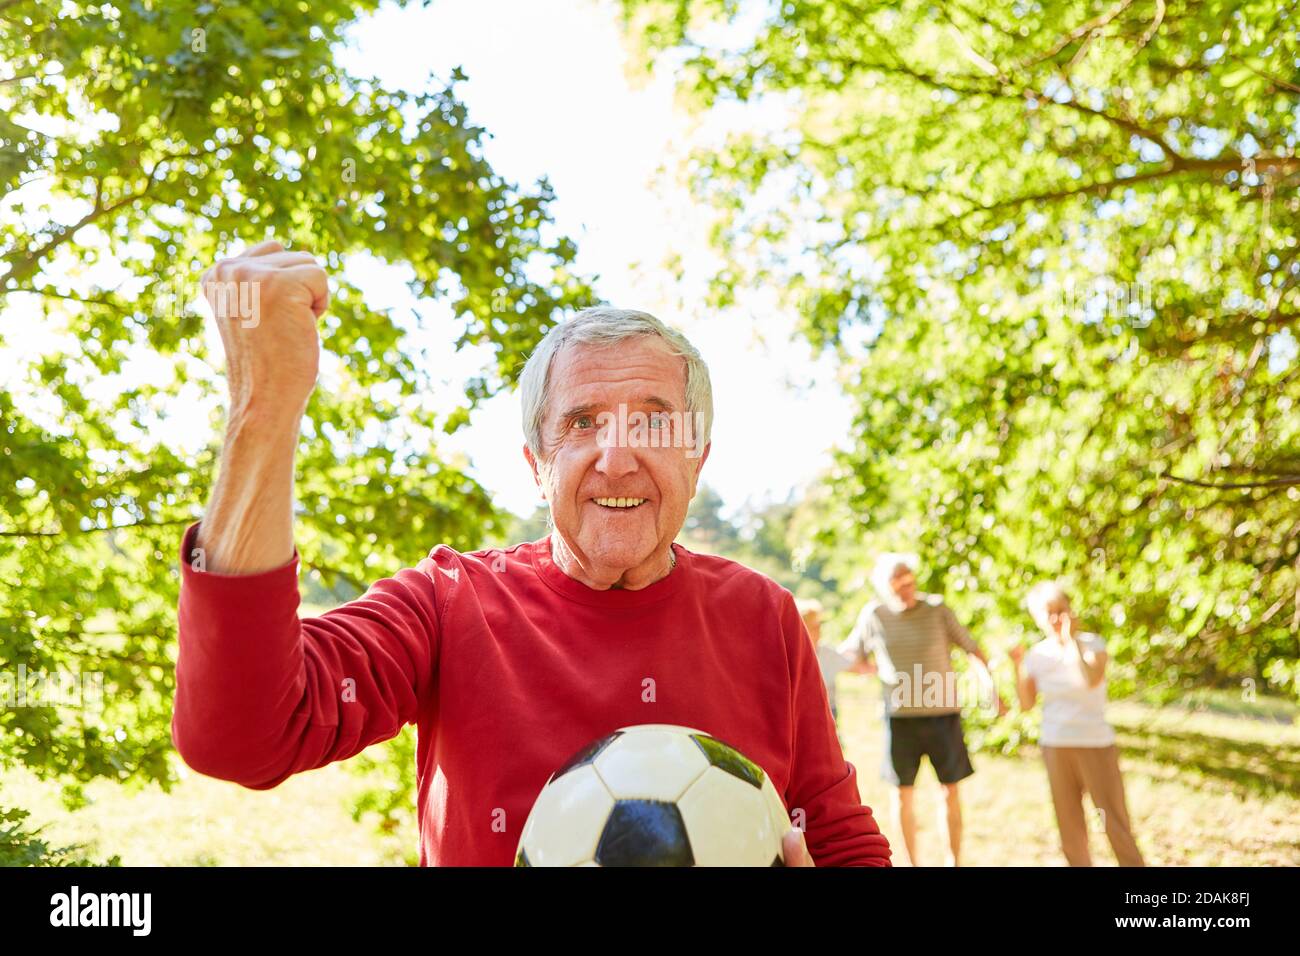 Vital senior man with clenched fist as the winner after a soccer game in the park Stock Photo